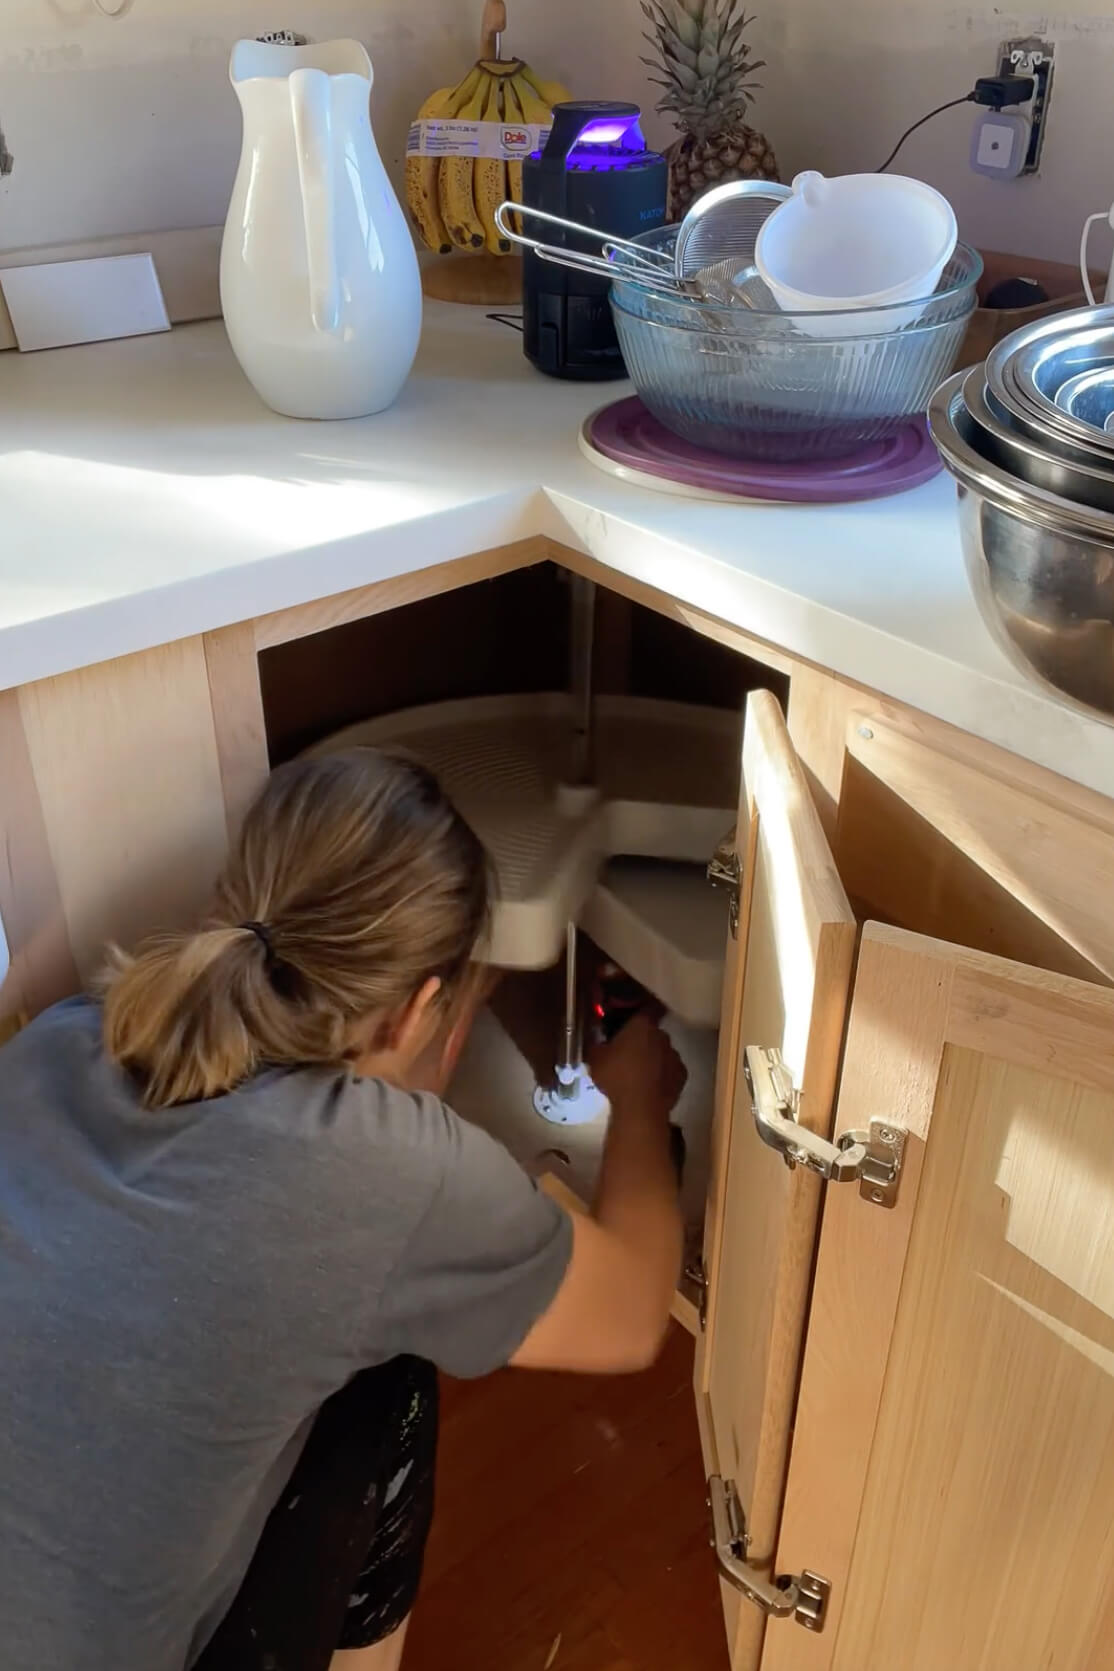 Removing a Lazy Susan from a kitchen cabinet.